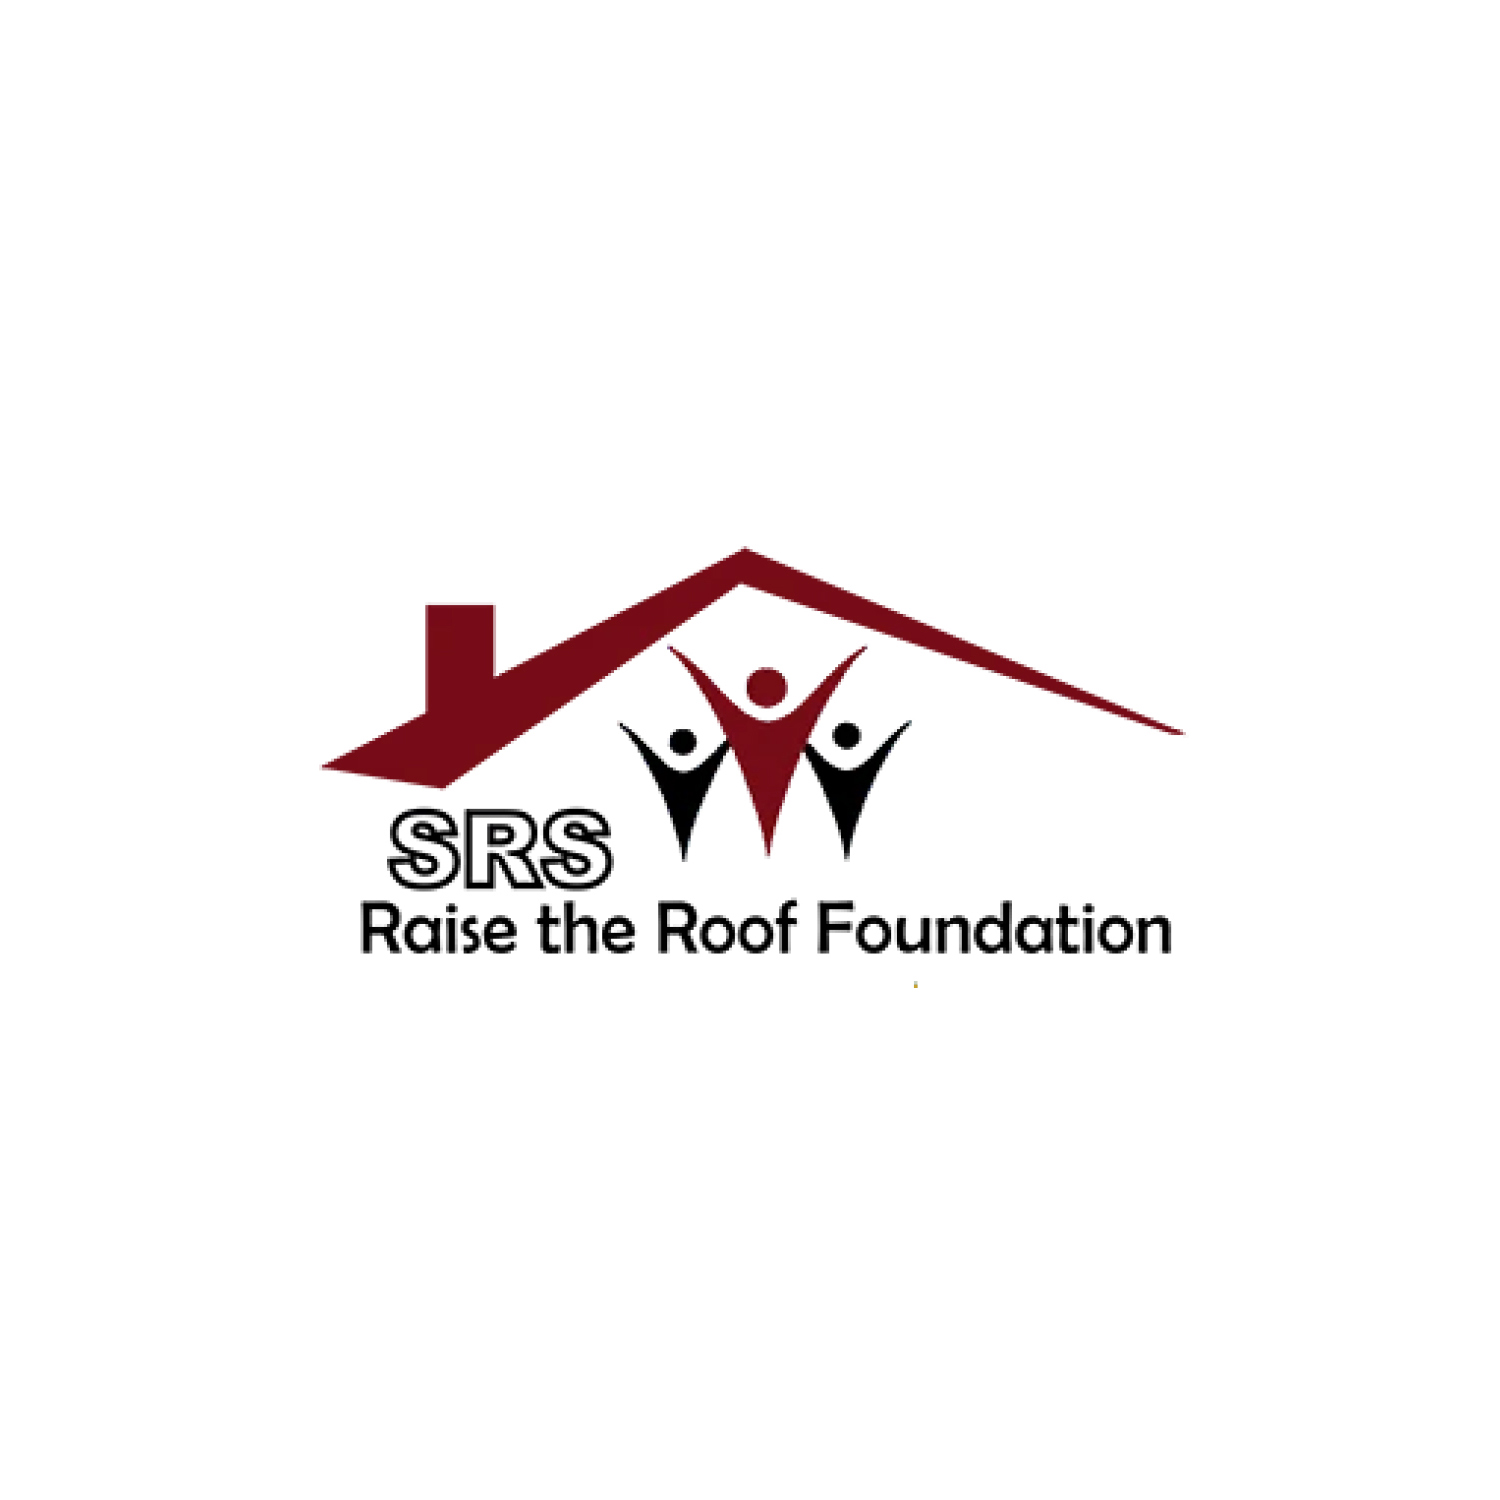 SRS Raise the Roof Foundation